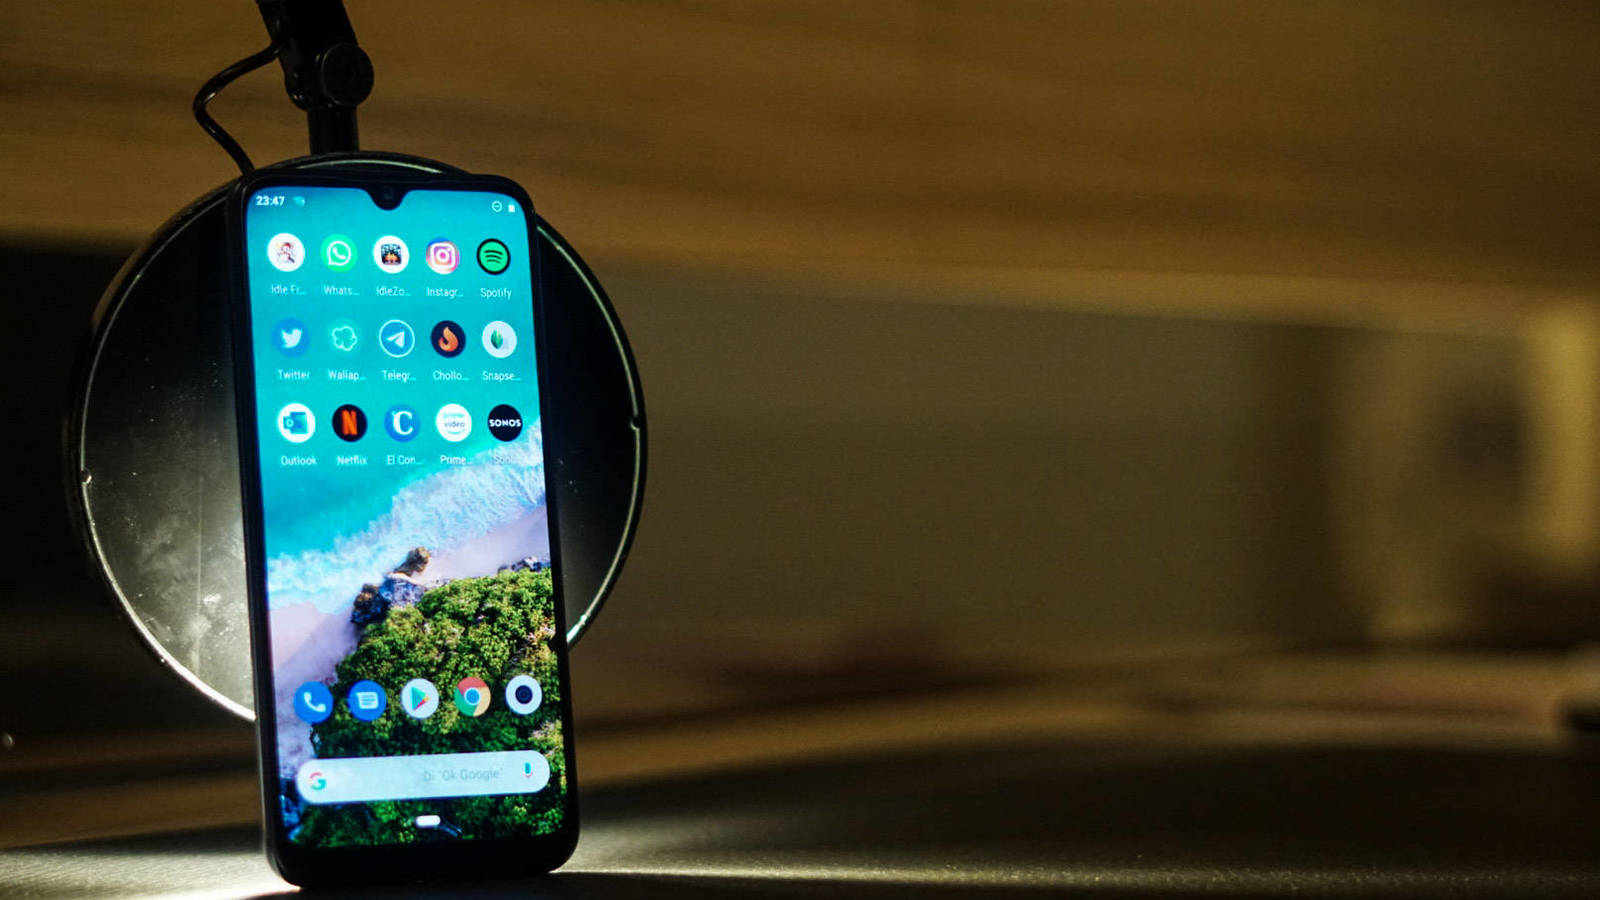 Grab Xiaomi Mi A3 For The Beat Price Of $215.99 (Coupon)